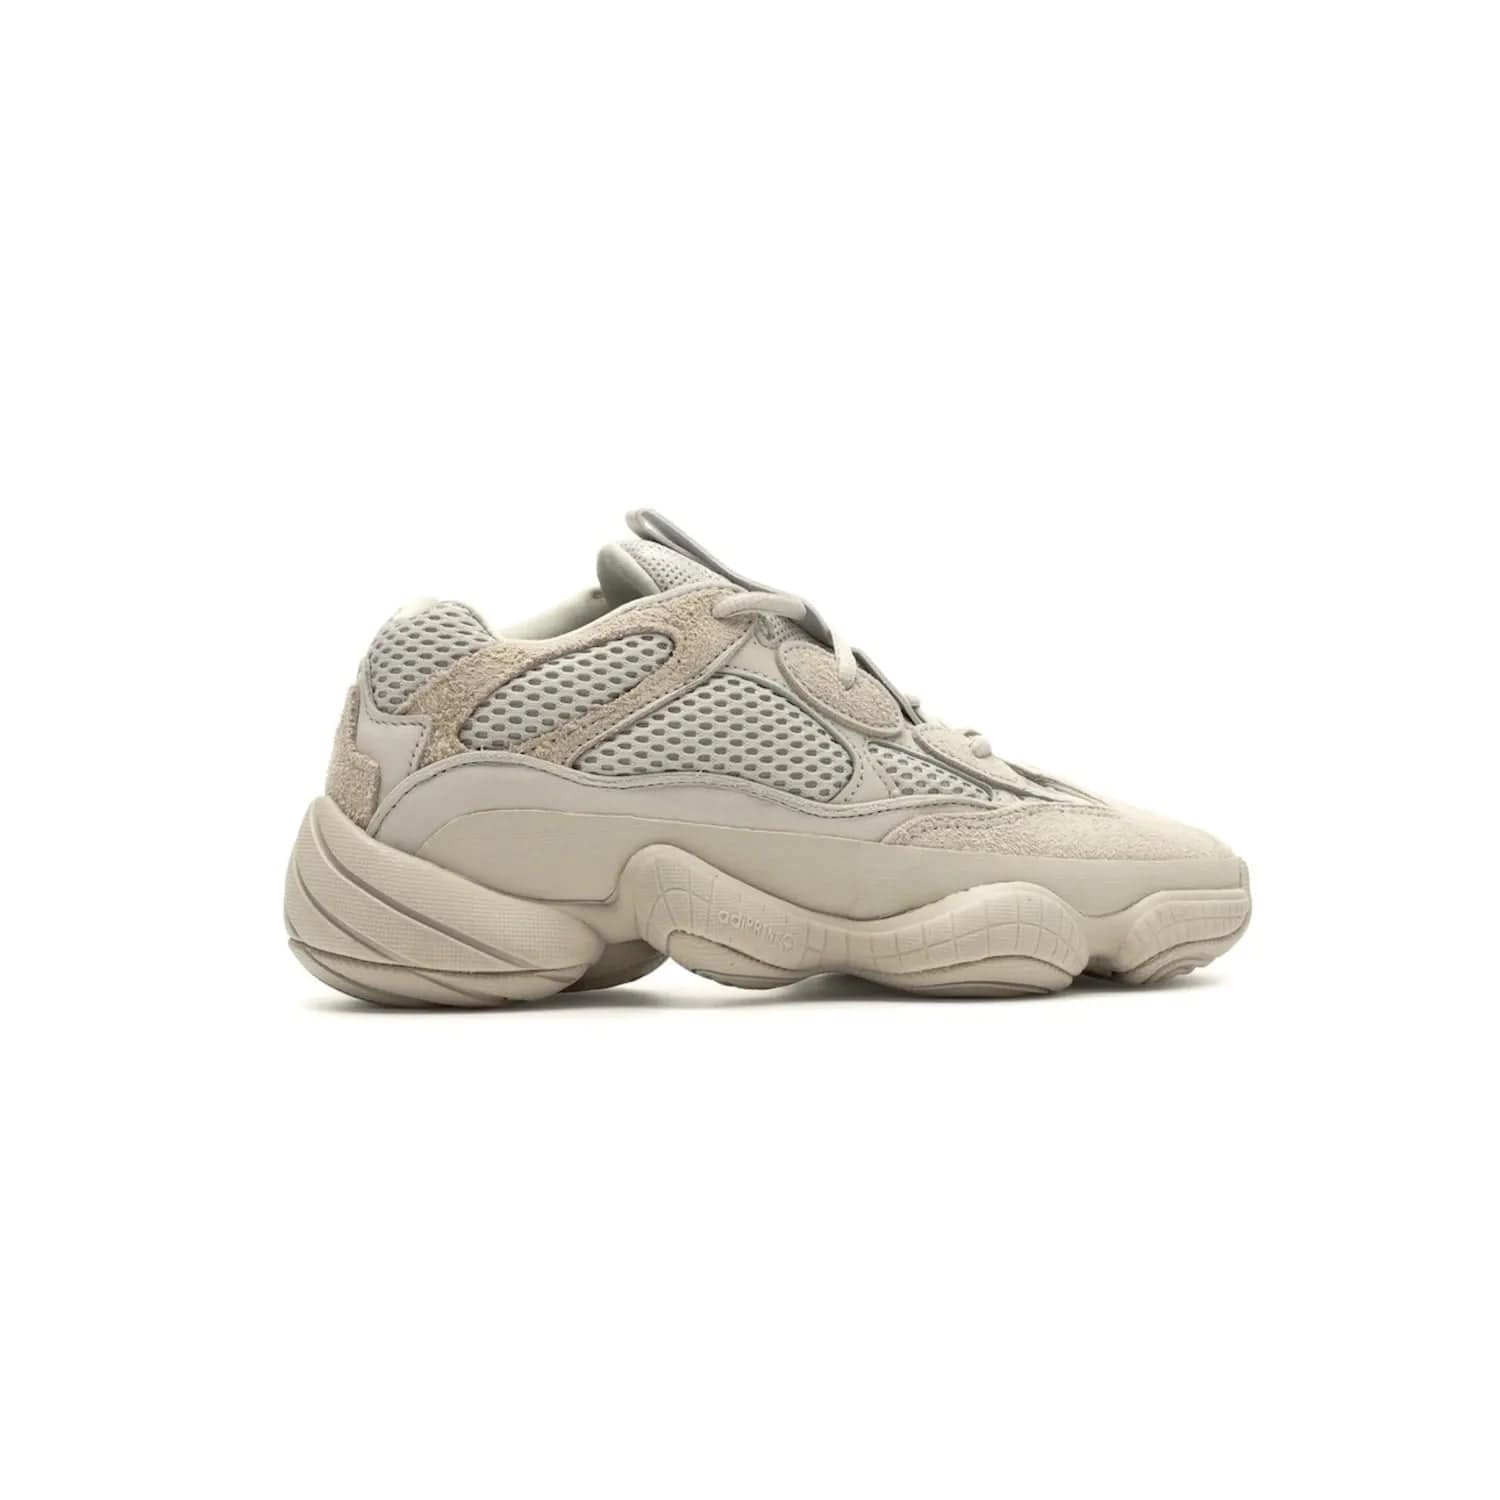 adidas Yeezy 500 Blush - Image 35 - Only at www.BallersClubKickz.com - Step up your sneaker game with the Adidas Yeezy 500 Blush. Monochromatic pale pink palette, hiking-inspired suede/mesh construction, plus adiPRENE sole for comfort and performance. Get the Adidas Yeezy 500 and experience true style and comfort.